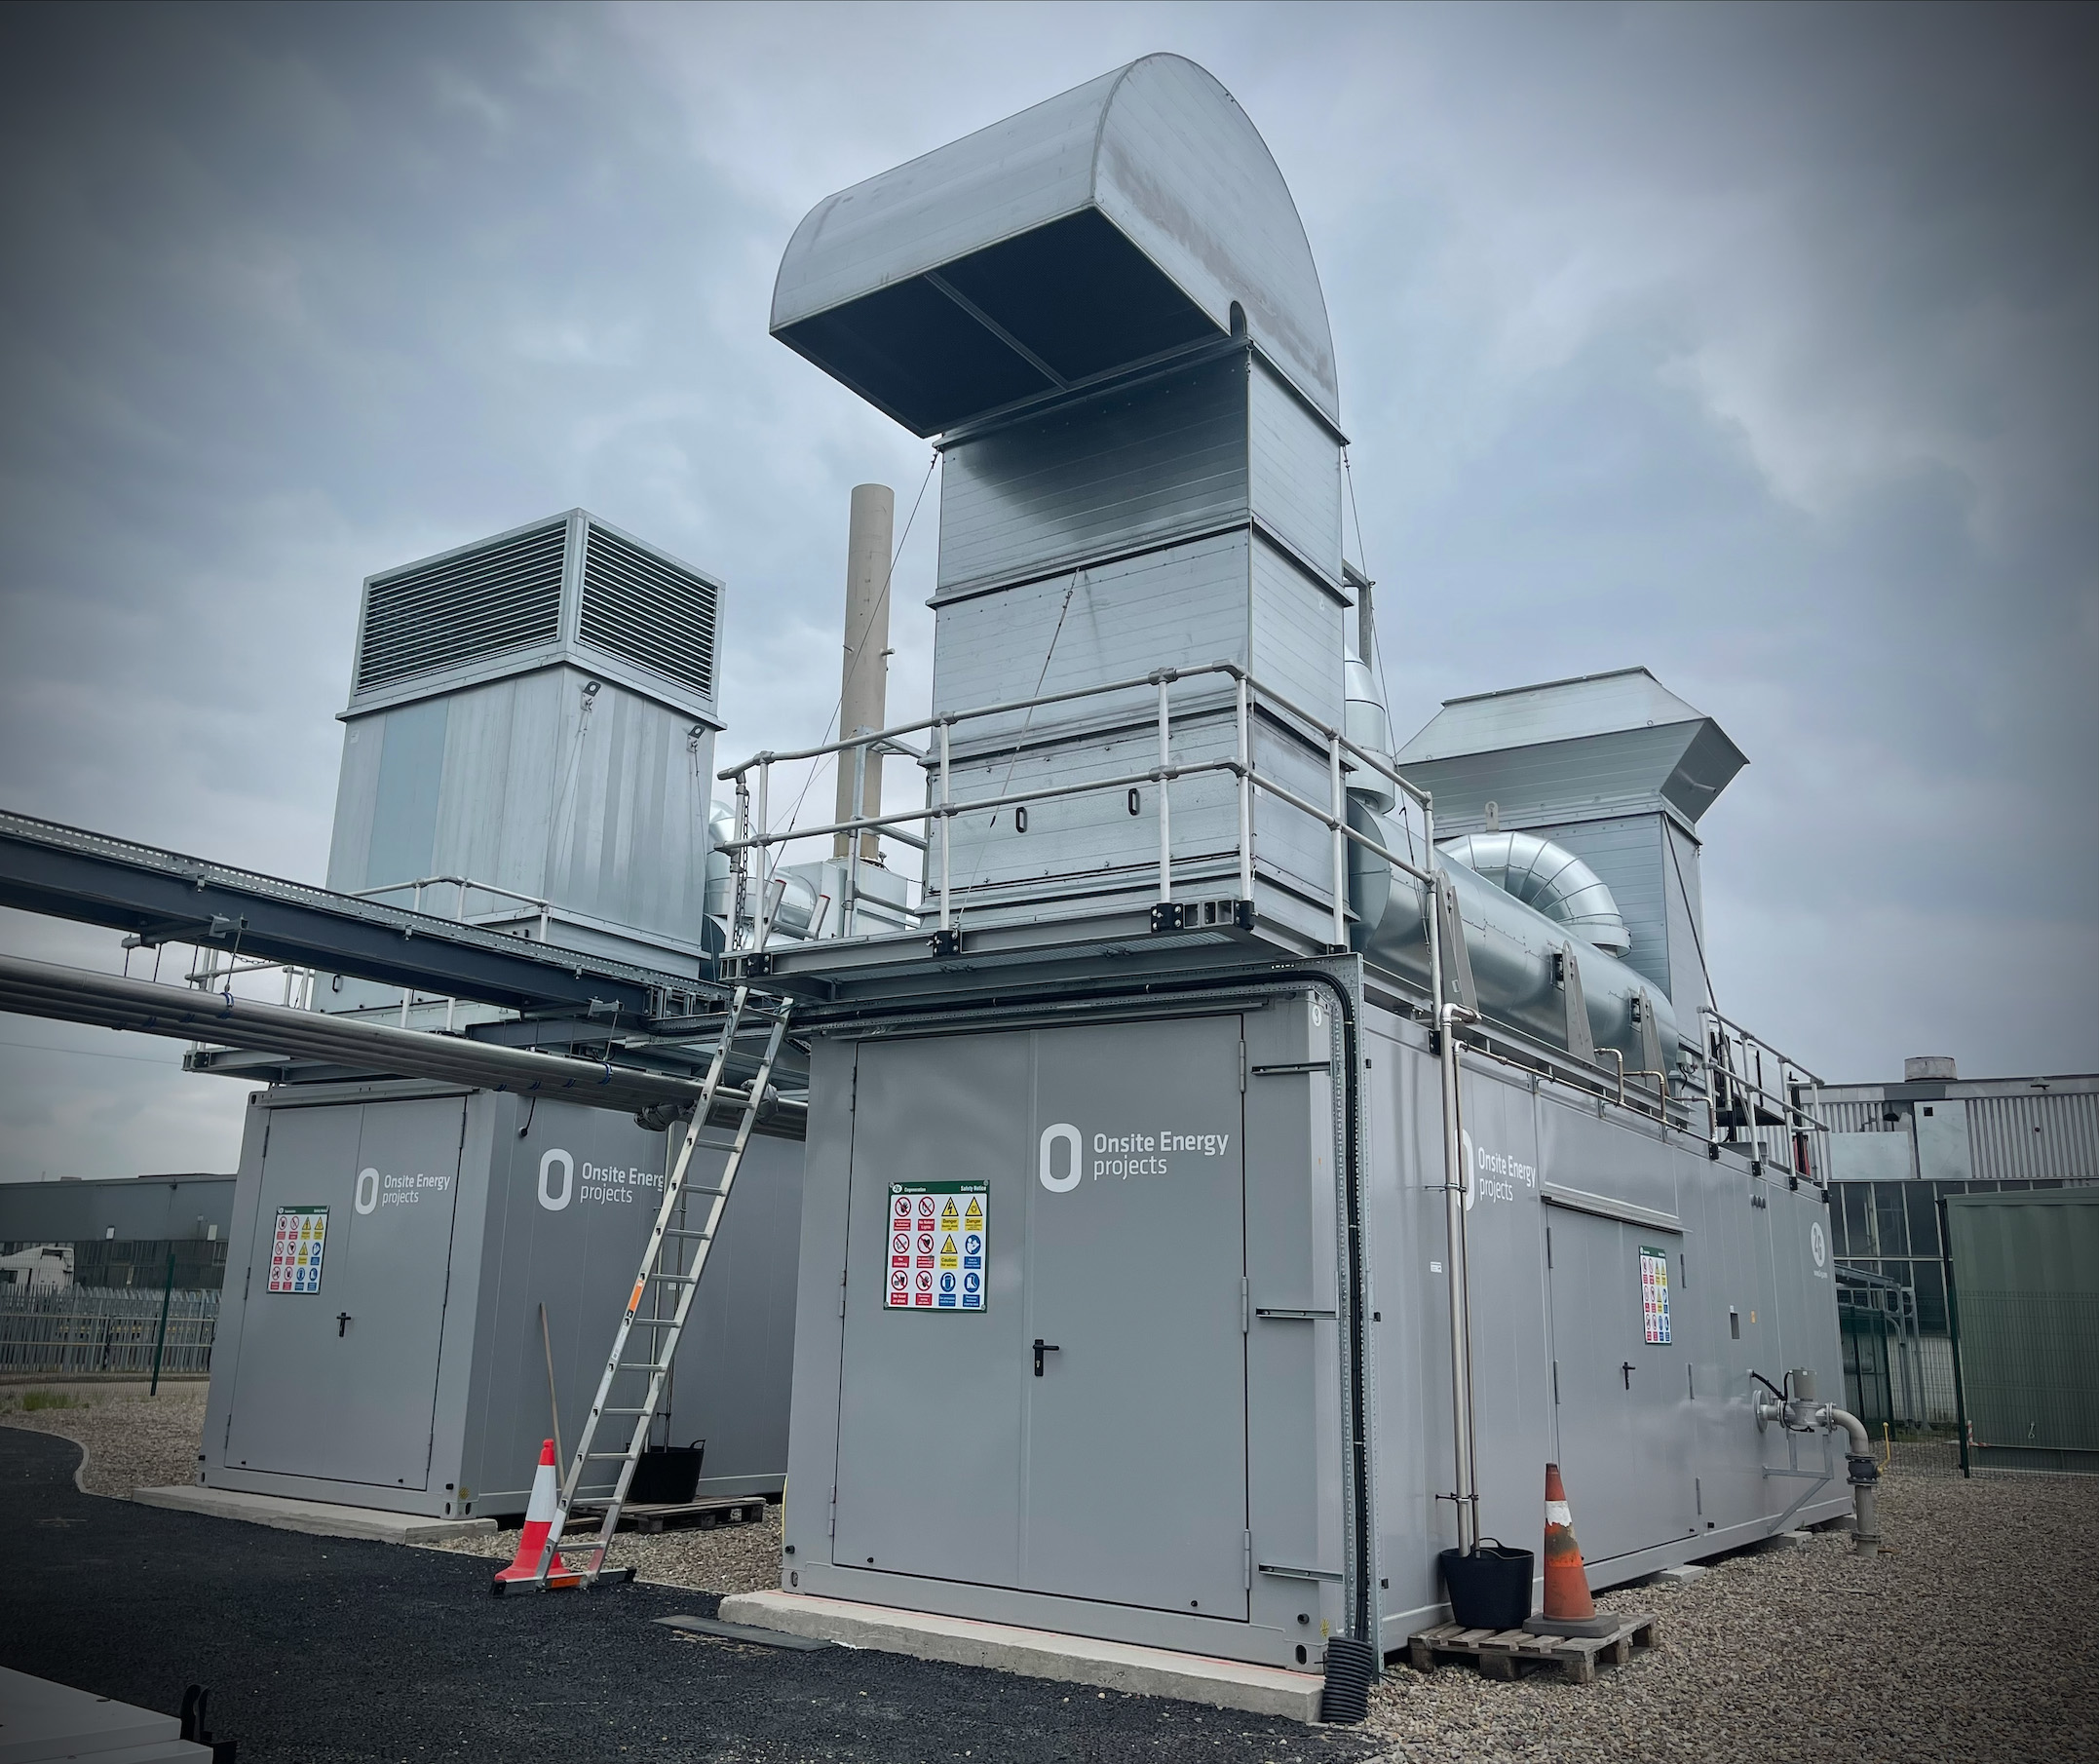 On-Site Energy CHP system installed in global automotive manufacturing facility